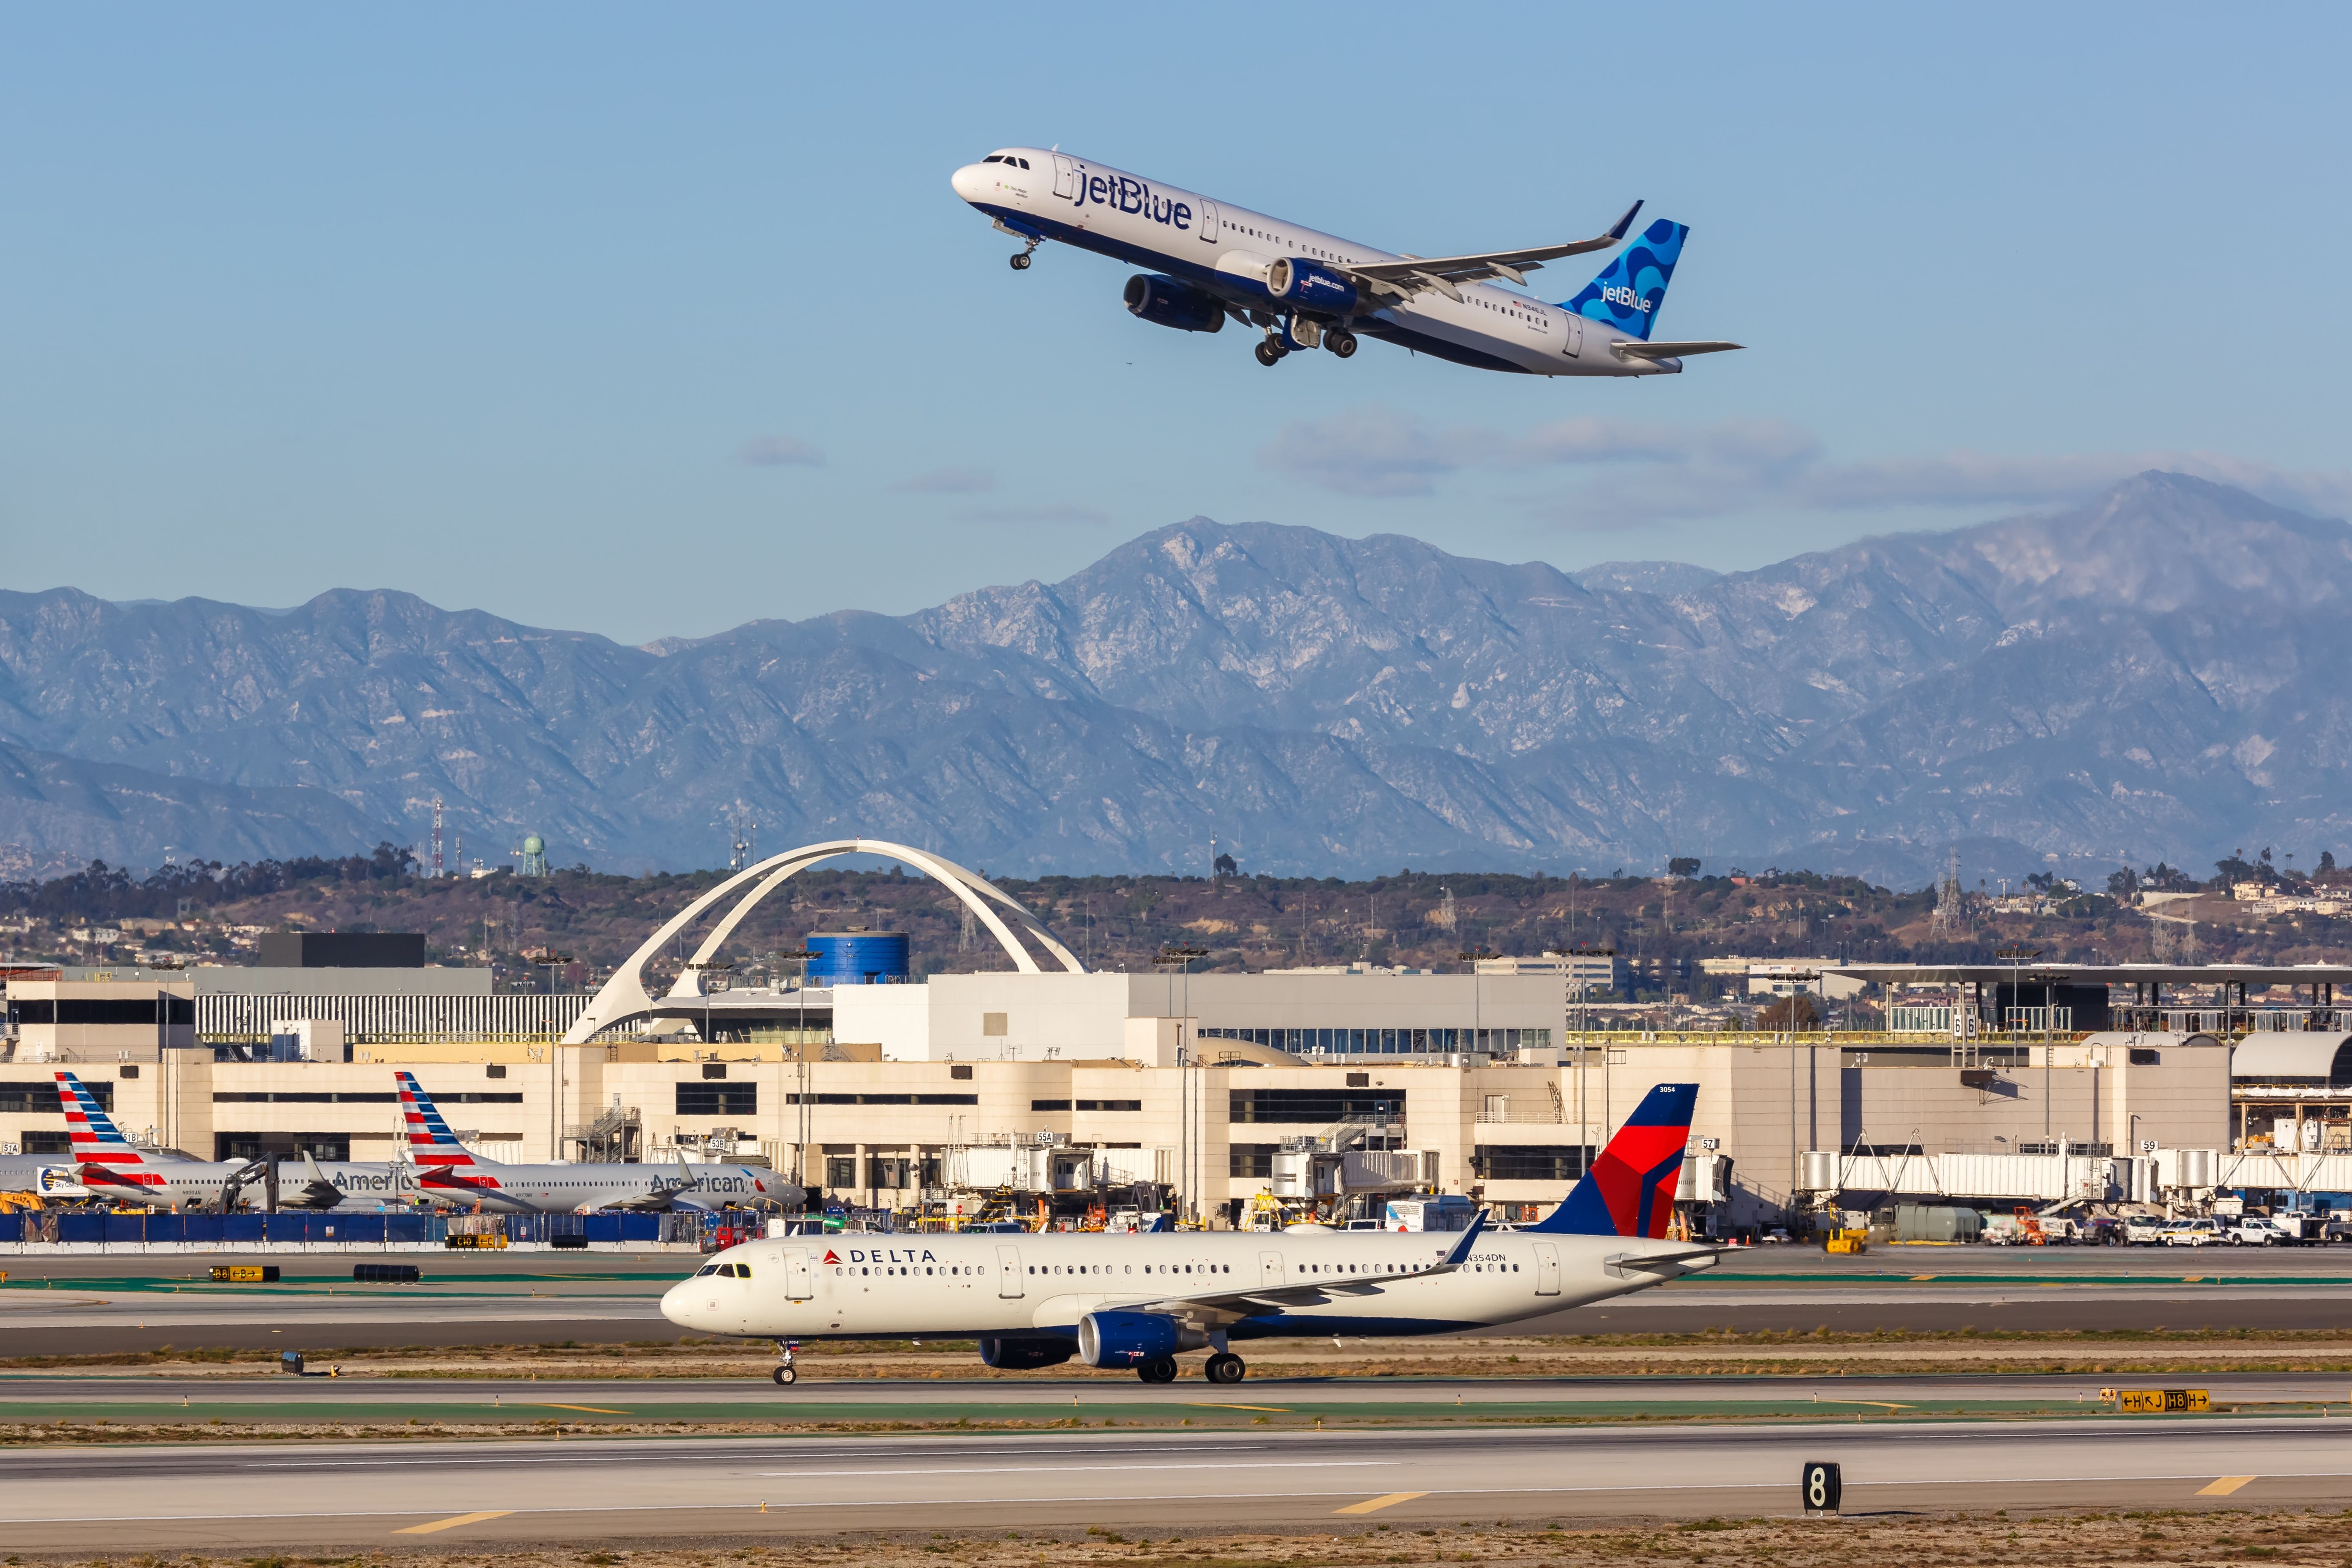 A JetBlue AIrcraft takes off as a Delta Air Lines aircraft waits on the apron In Los Angeles.